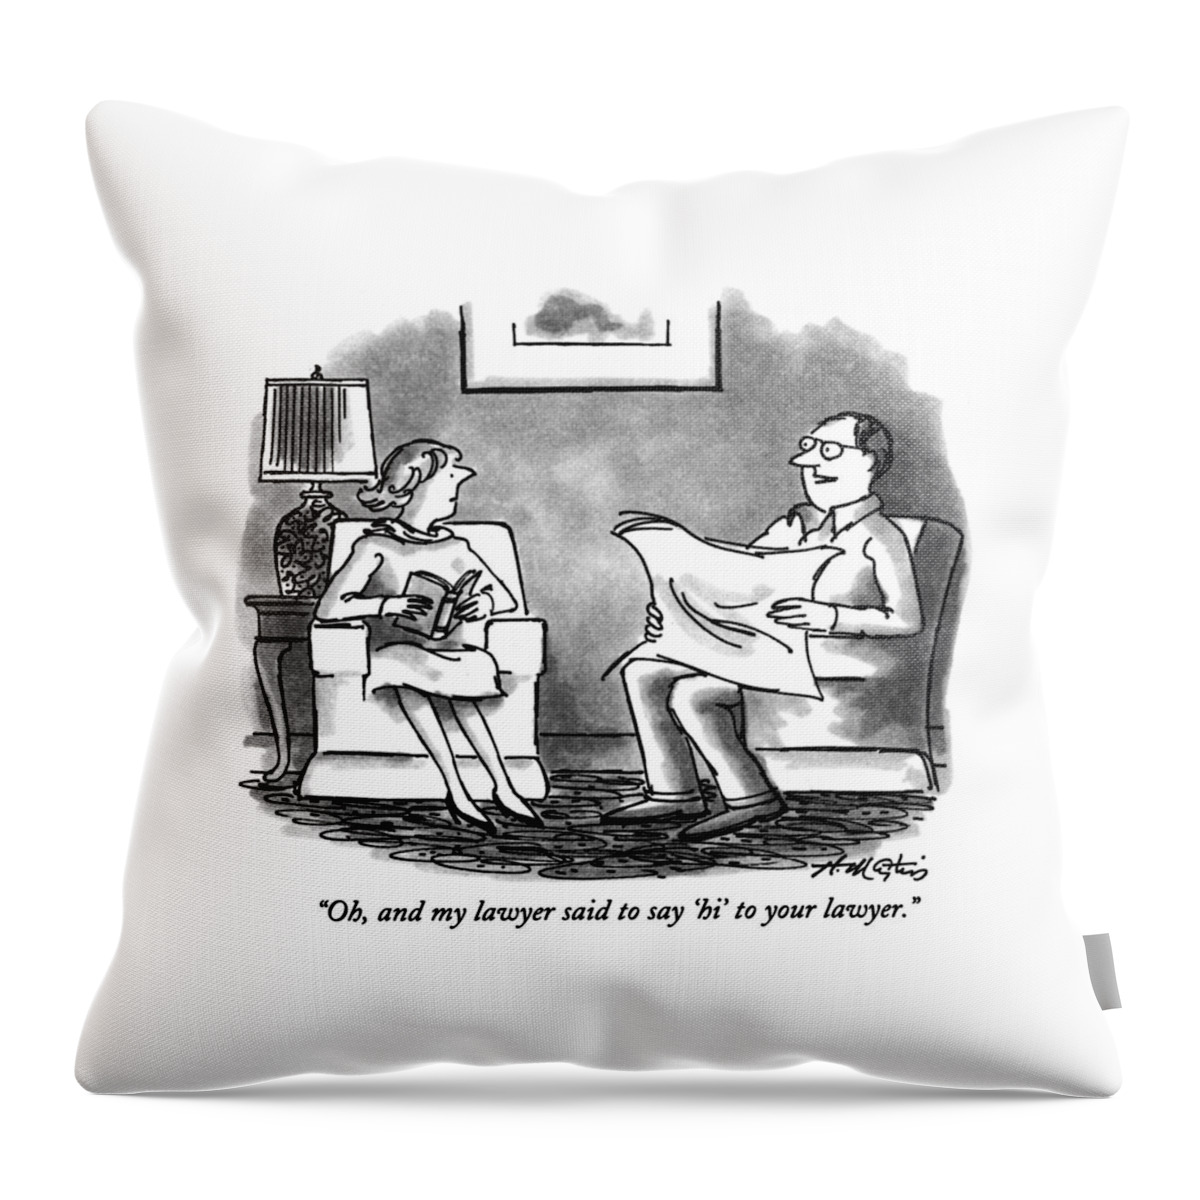 Oh, And My Lawyer Said To Say 'hi' To Your Lawyer Throw Pillow